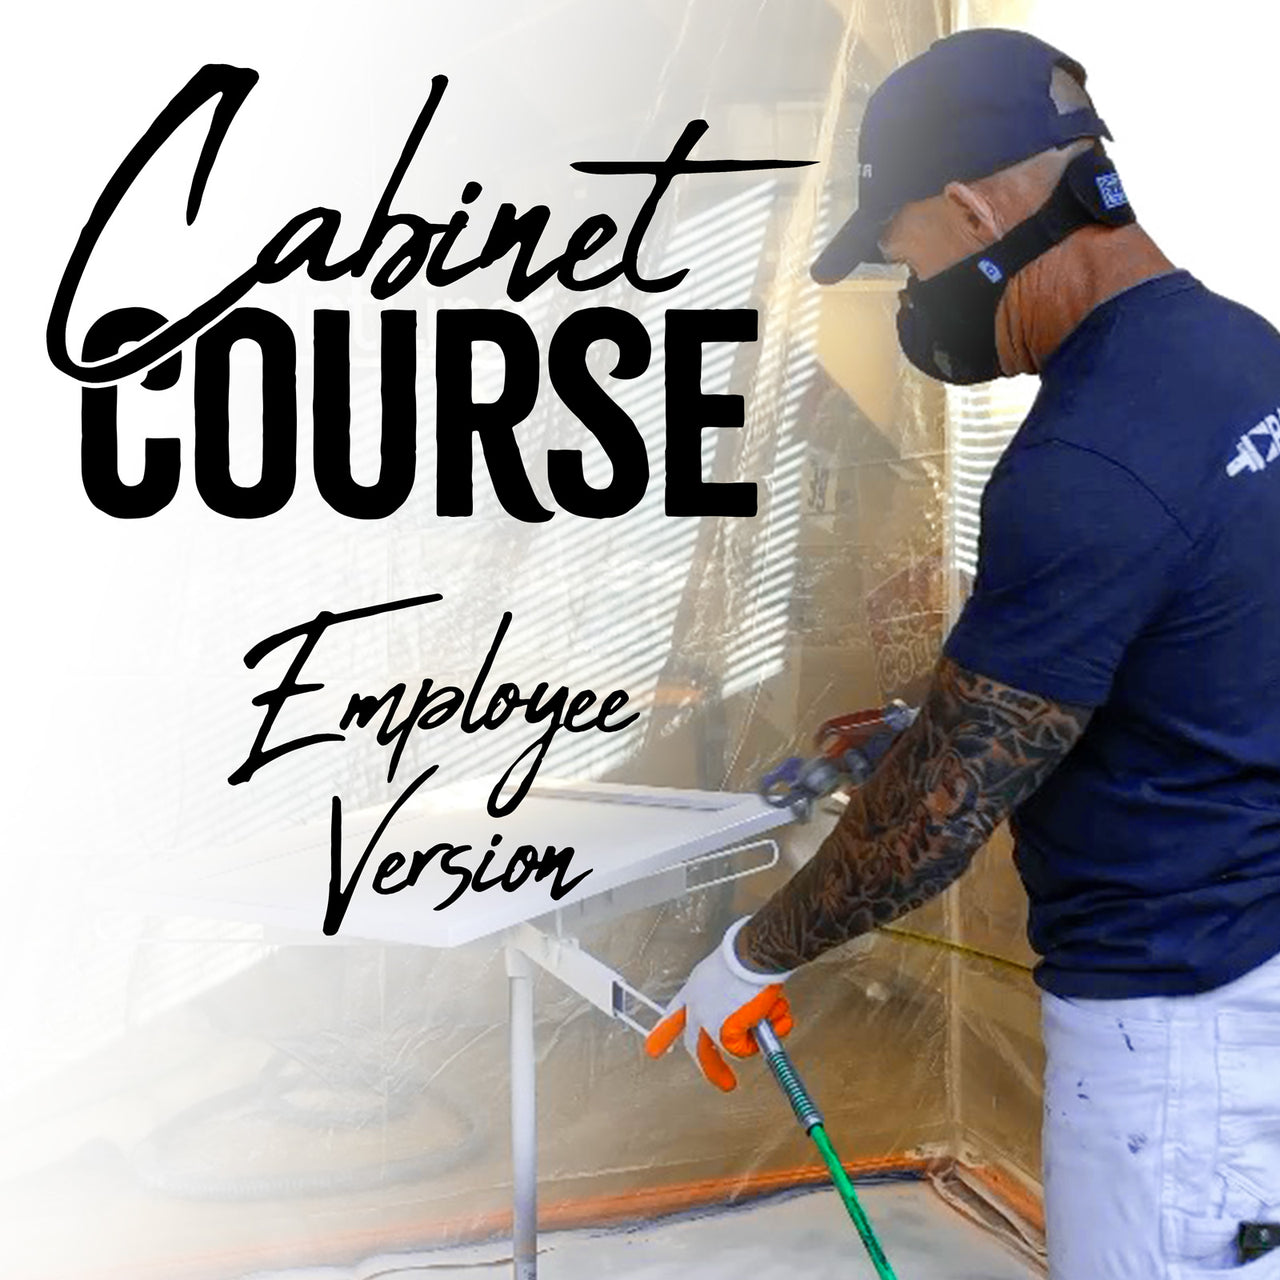 Employee Cabinet Course